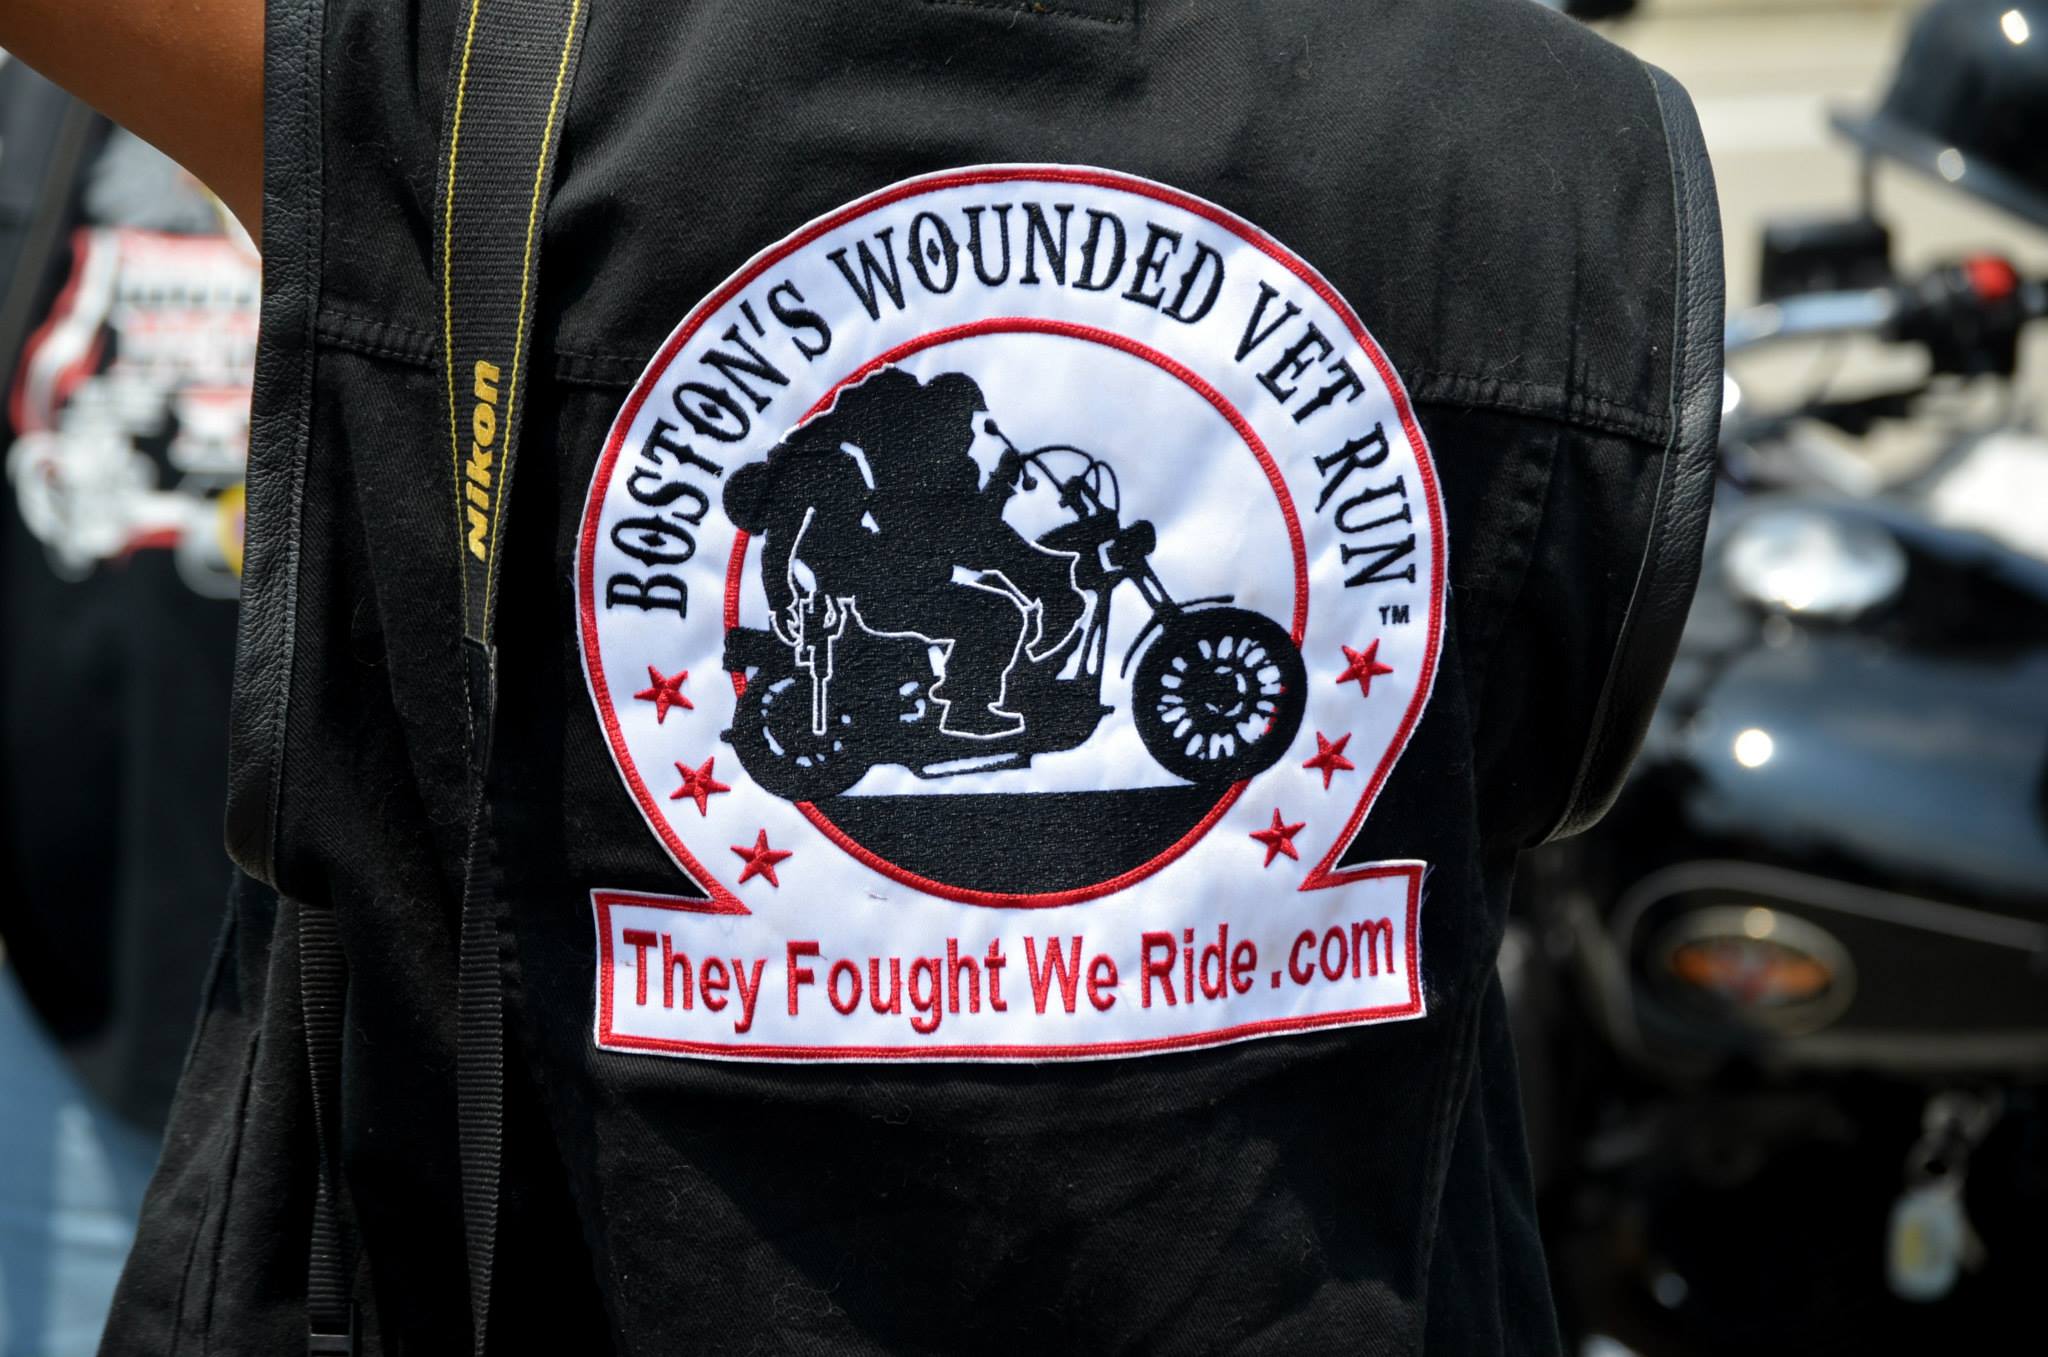 Boston Wounded Vet MC Ride presents Andy Kingsley his New 2014 Modified Trike8